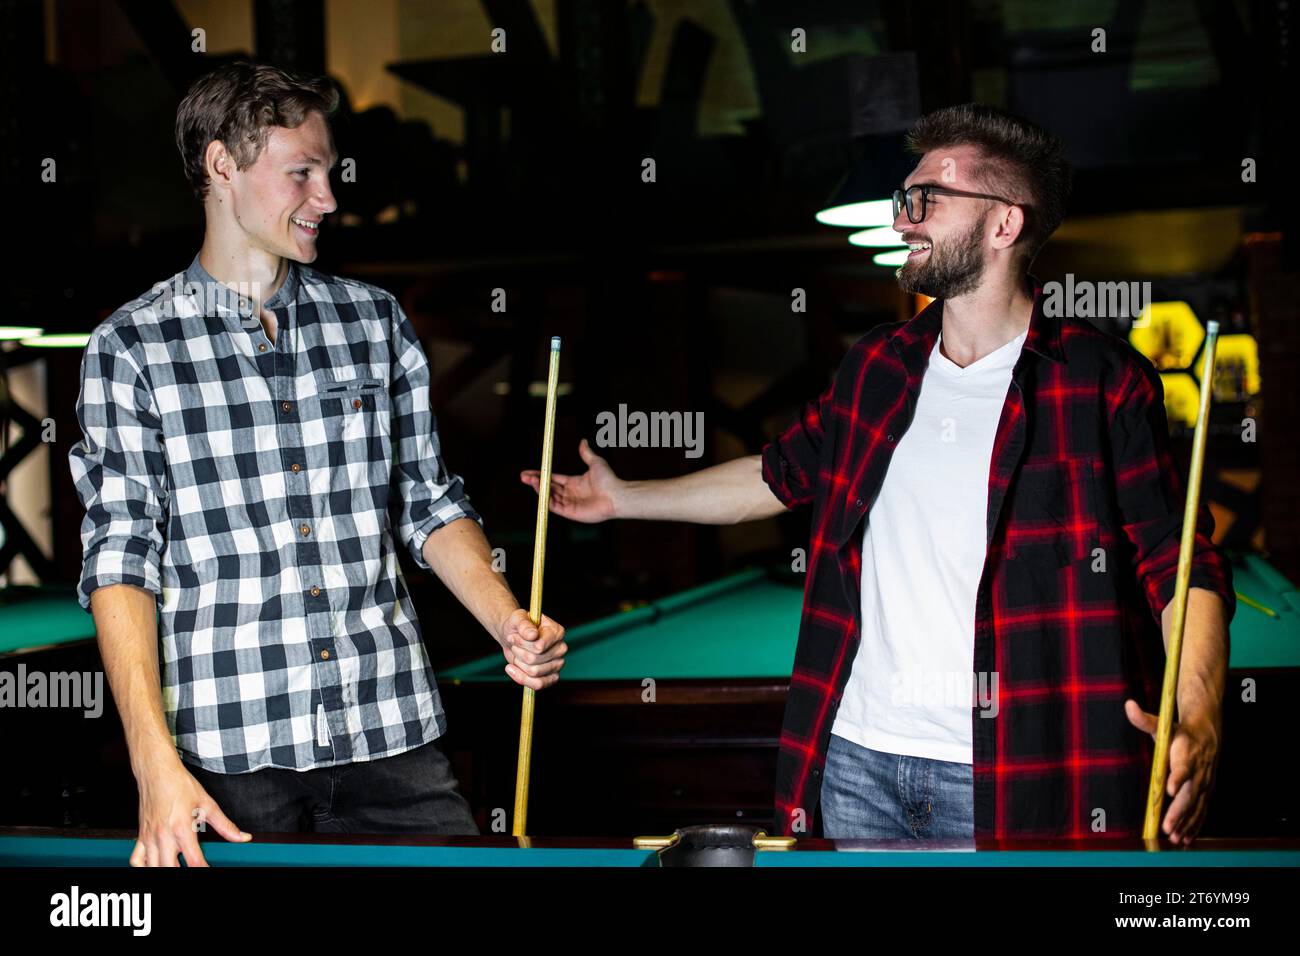 Medium shot smiley guys with pool cues Stock Photo